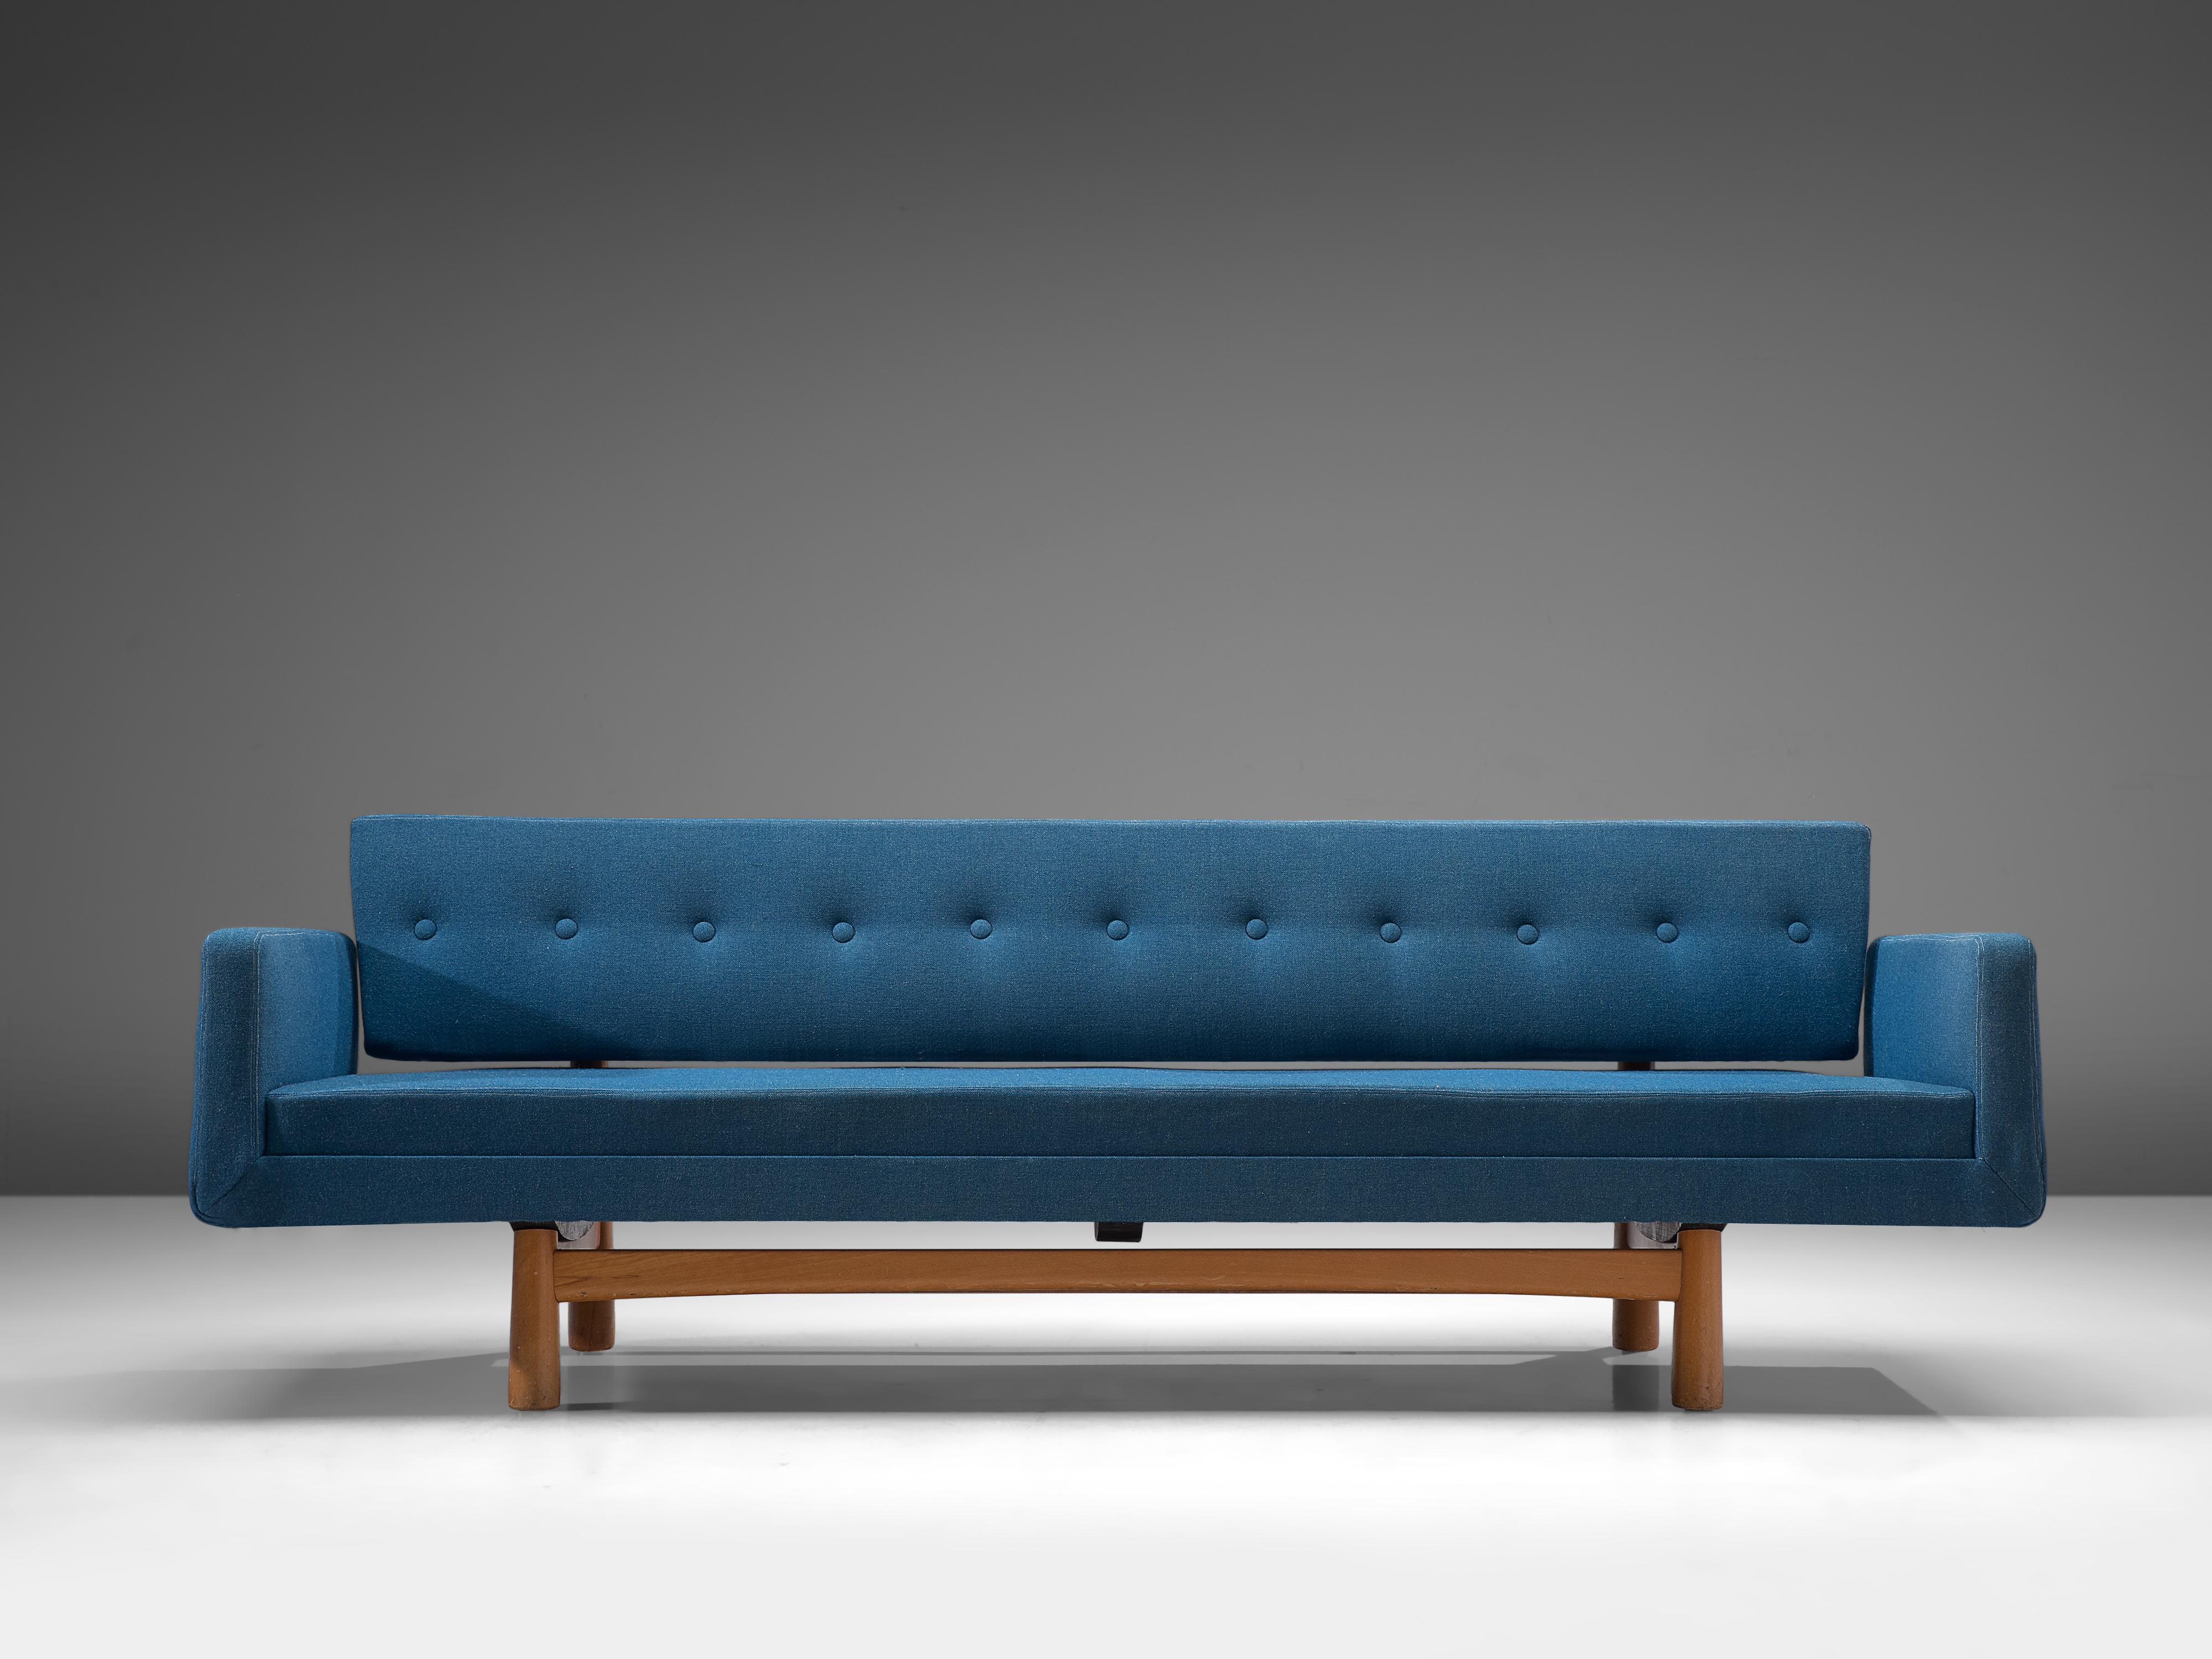 Edward Wormley for Dunbar, sofa model 5316, blue fabric, beech, United States, 1960s

This three-seat sofa was designed by Edward Wormley for Dunbar in the 1960s. The eye-catching blue fabric turns this elegant sofa into a real statement piece.